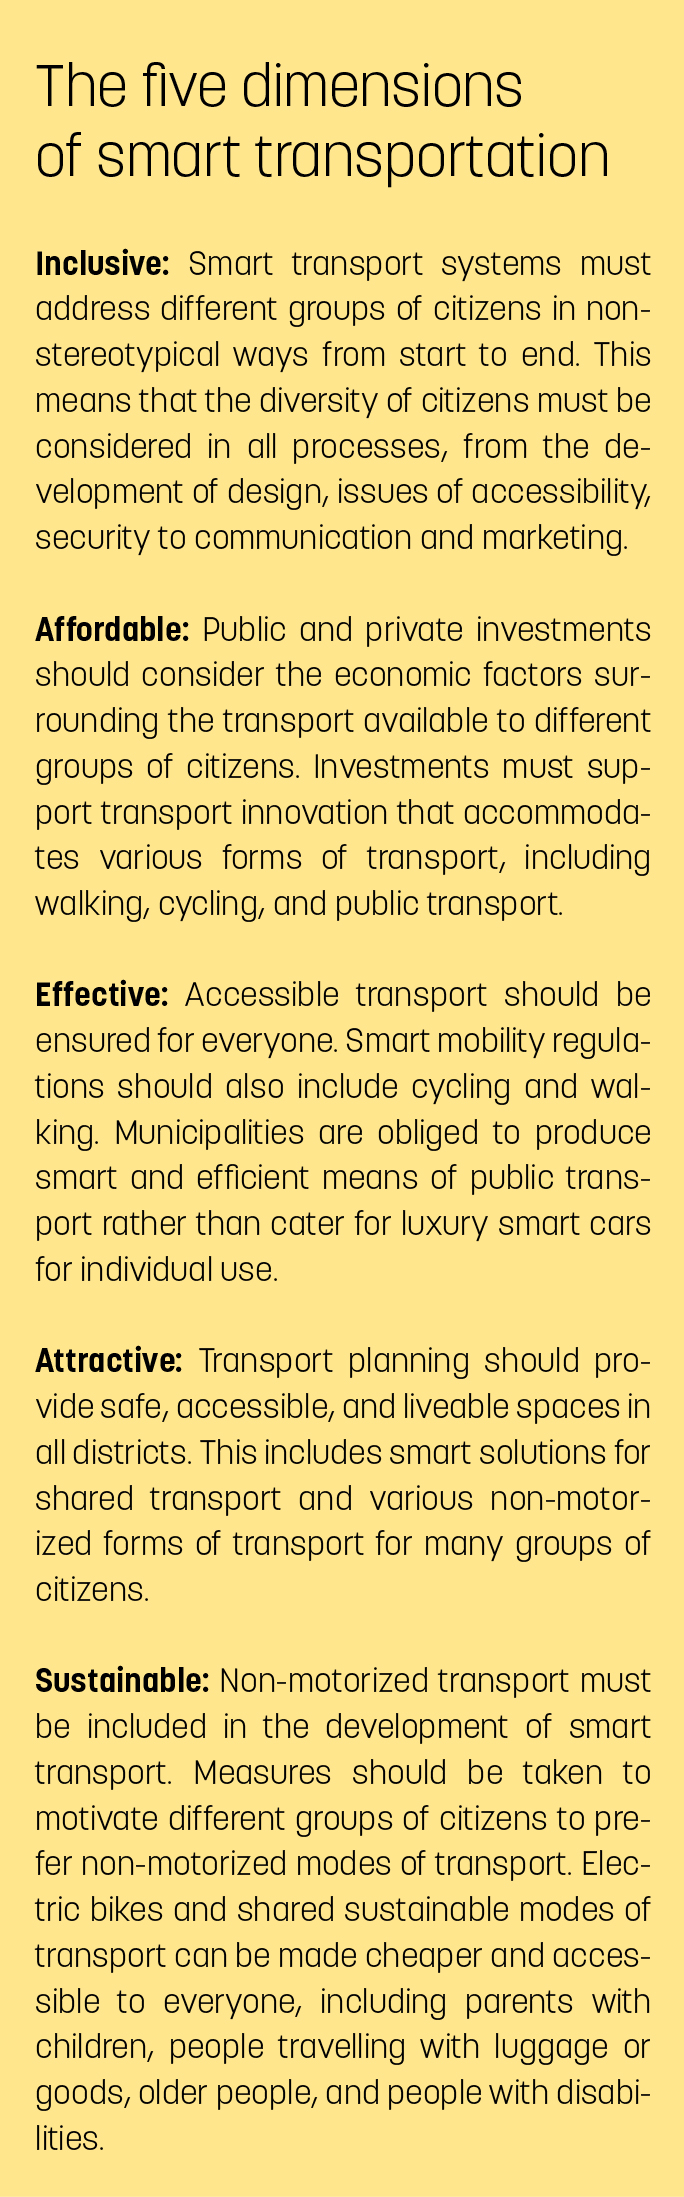 The five dimensions of smart transportationInclusive: Smart transport systems must address different groups of citizens in nonstereotypical ways from start to end. This means that the diversity of citizens must be considered in all processes, from the development of design, issues of accessibility, security to communication and marketing.
Affordable: Public and private investments should consider the economic factors surrounding the transport available to different groups of citizens. Investments must support transport innovation that accommodates various forms of transport, including walking, cycling, and public transport.
Effective: Accessible transport should be ensured for everyone. Smart mobility regulations should also include cycling and walking. Municipalities are obliged to produce smart and efficient means of public transport rather than cater for luxury smart cars for individual use.
Attractive: Transport planning should provide safe, accessible, and liveable spaces in all districts. This includes smart solutions for shared transport and various non-motorized forms of transport for many groups of citizens.
Sustainable: Non-motorized transport must be included in the development of smart transport. Measures should be taken to motivate different groups of citizens to prefer non-motorized modes of transport. Electric bikes and shared sustainable modes of transport can be made cheaper and accessible to everyone, including parents with children, people travelling with luggage or goods, older people, and people with disabilities.